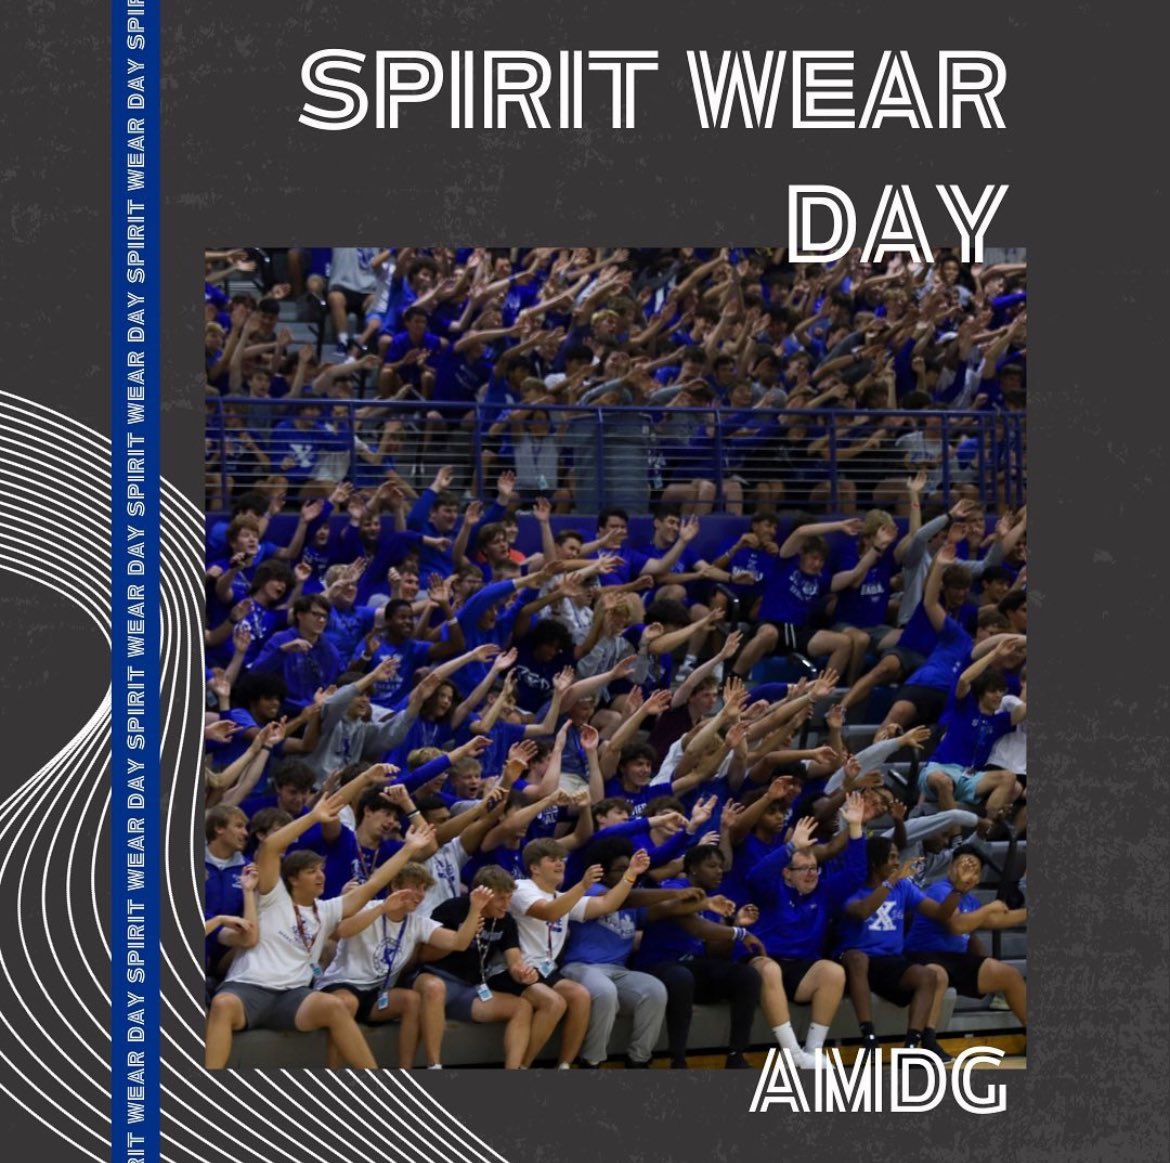 Reminder: Tomorrow is a Spirit Wear Day! #GoBombers